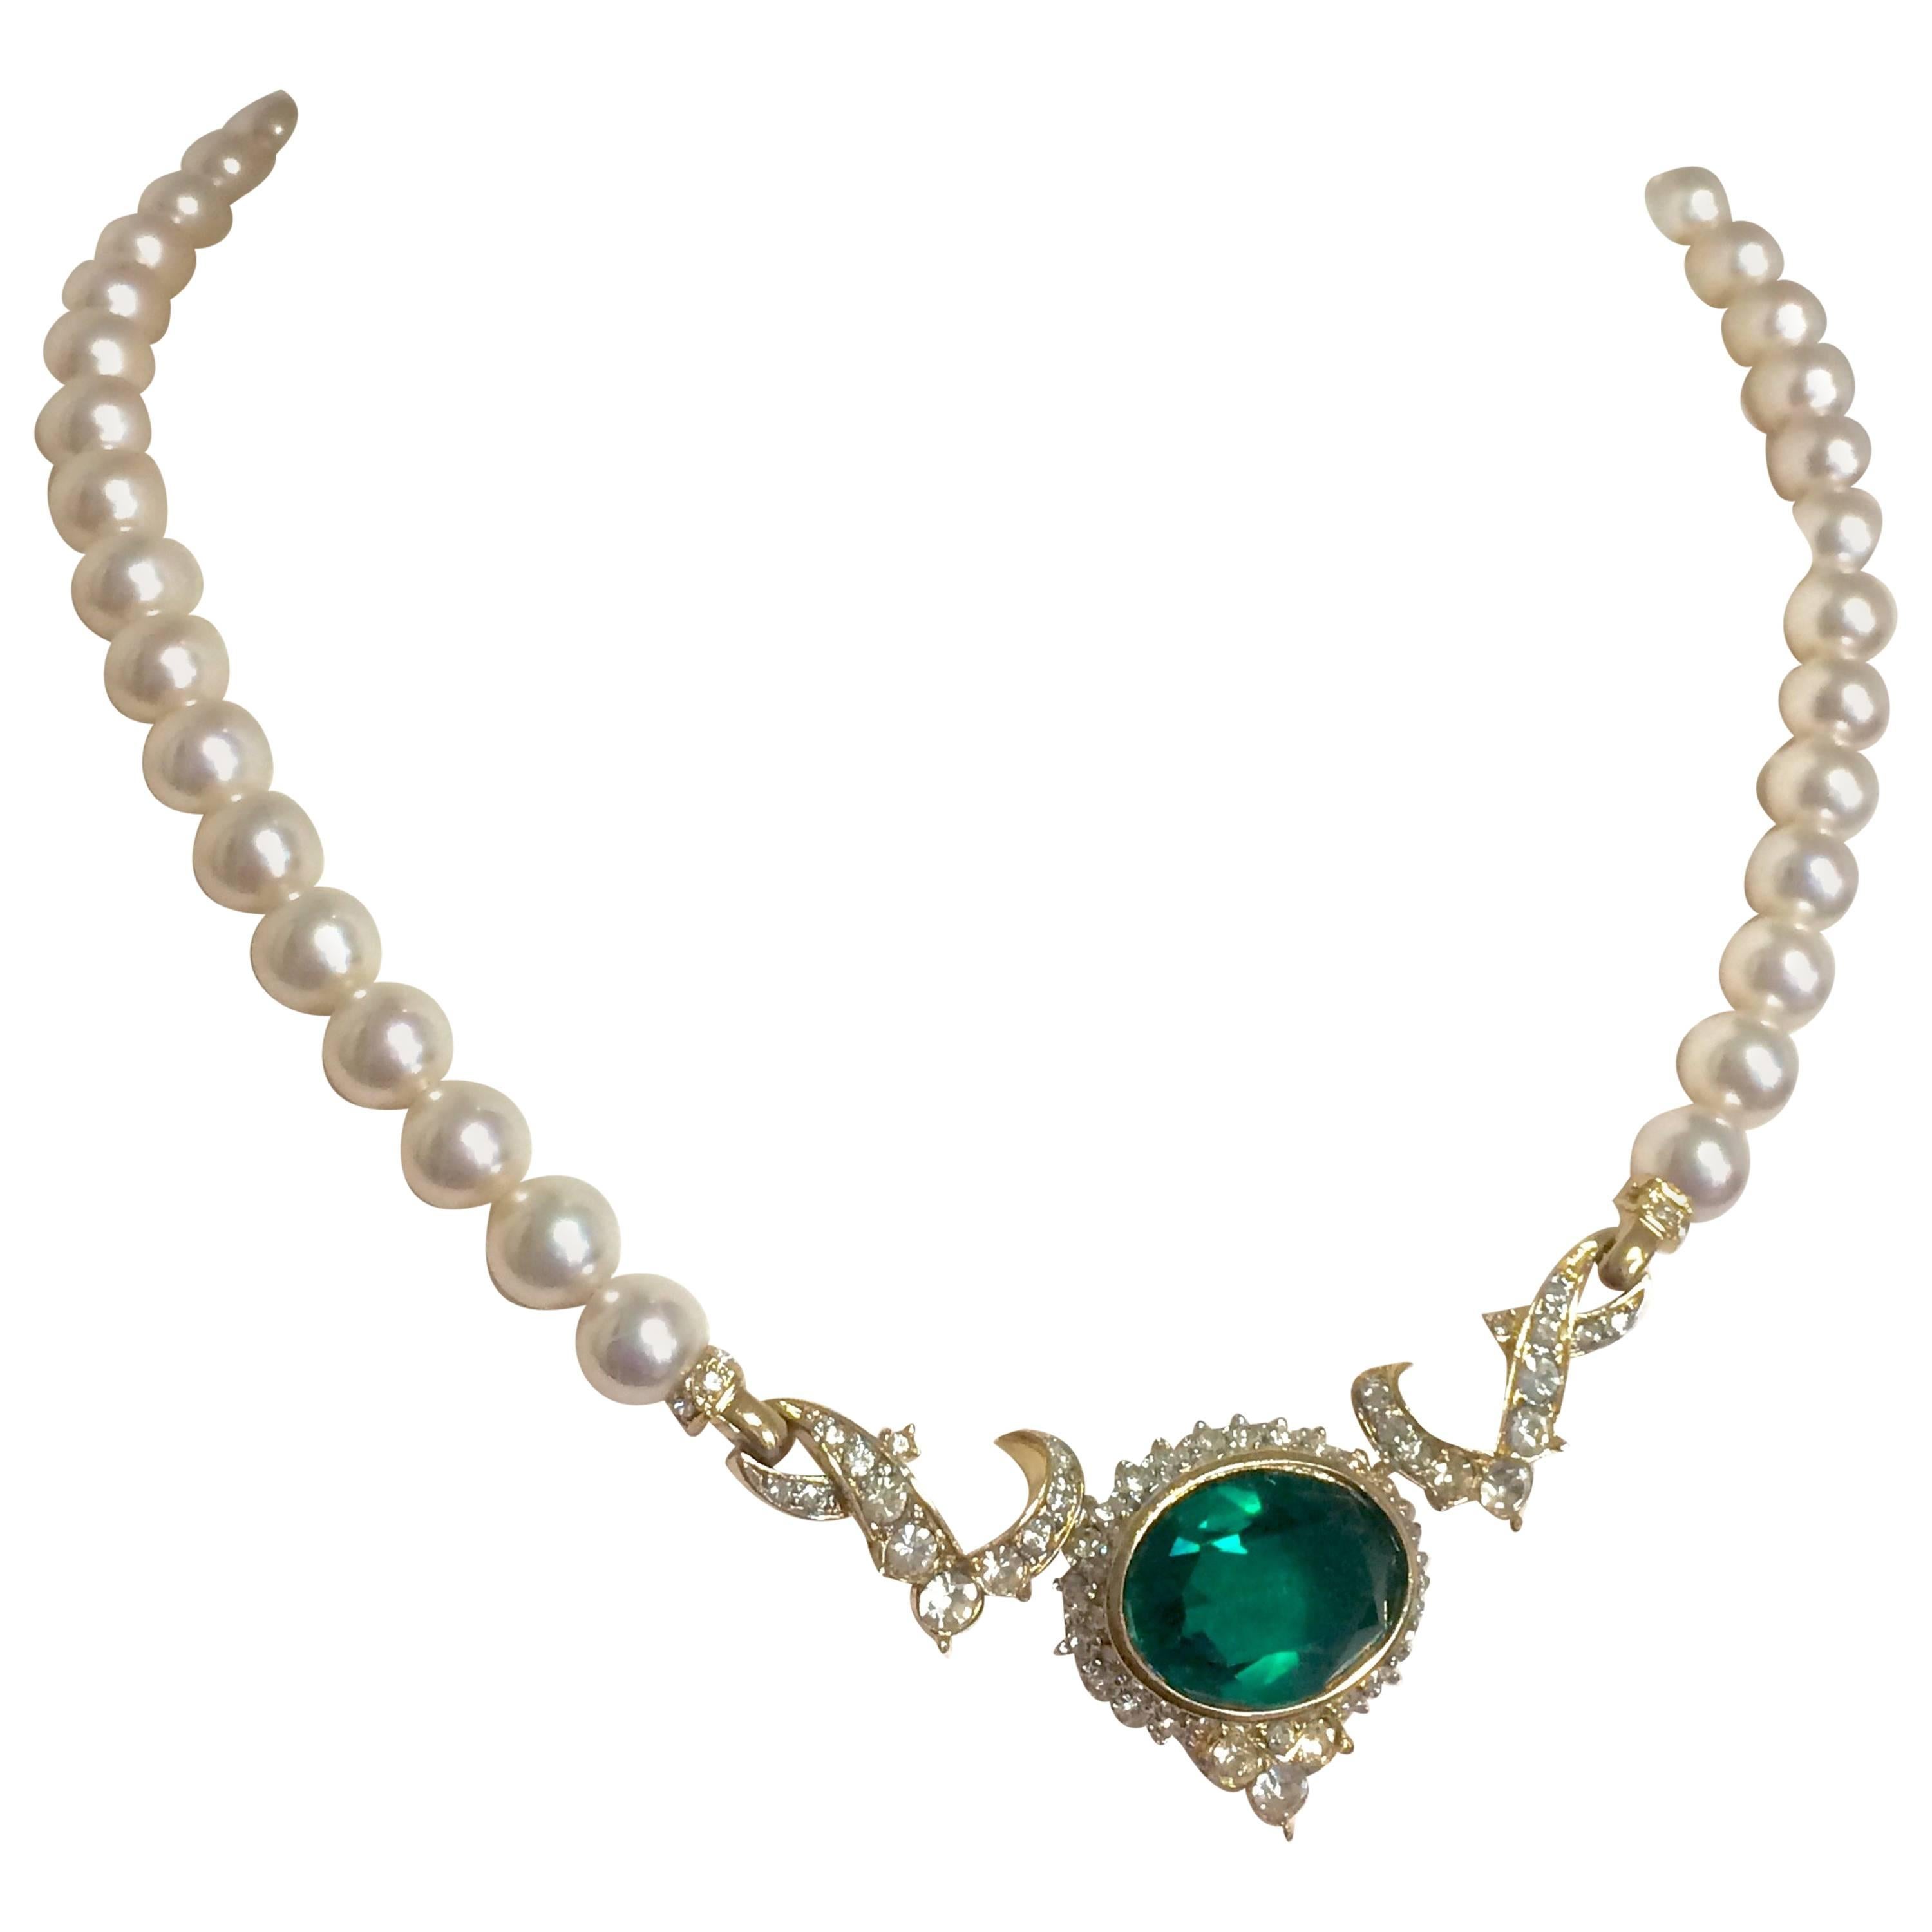 MINT. Vintage Nina Ricci faux pearl necklace with green Swarovski pendant top. For Sale